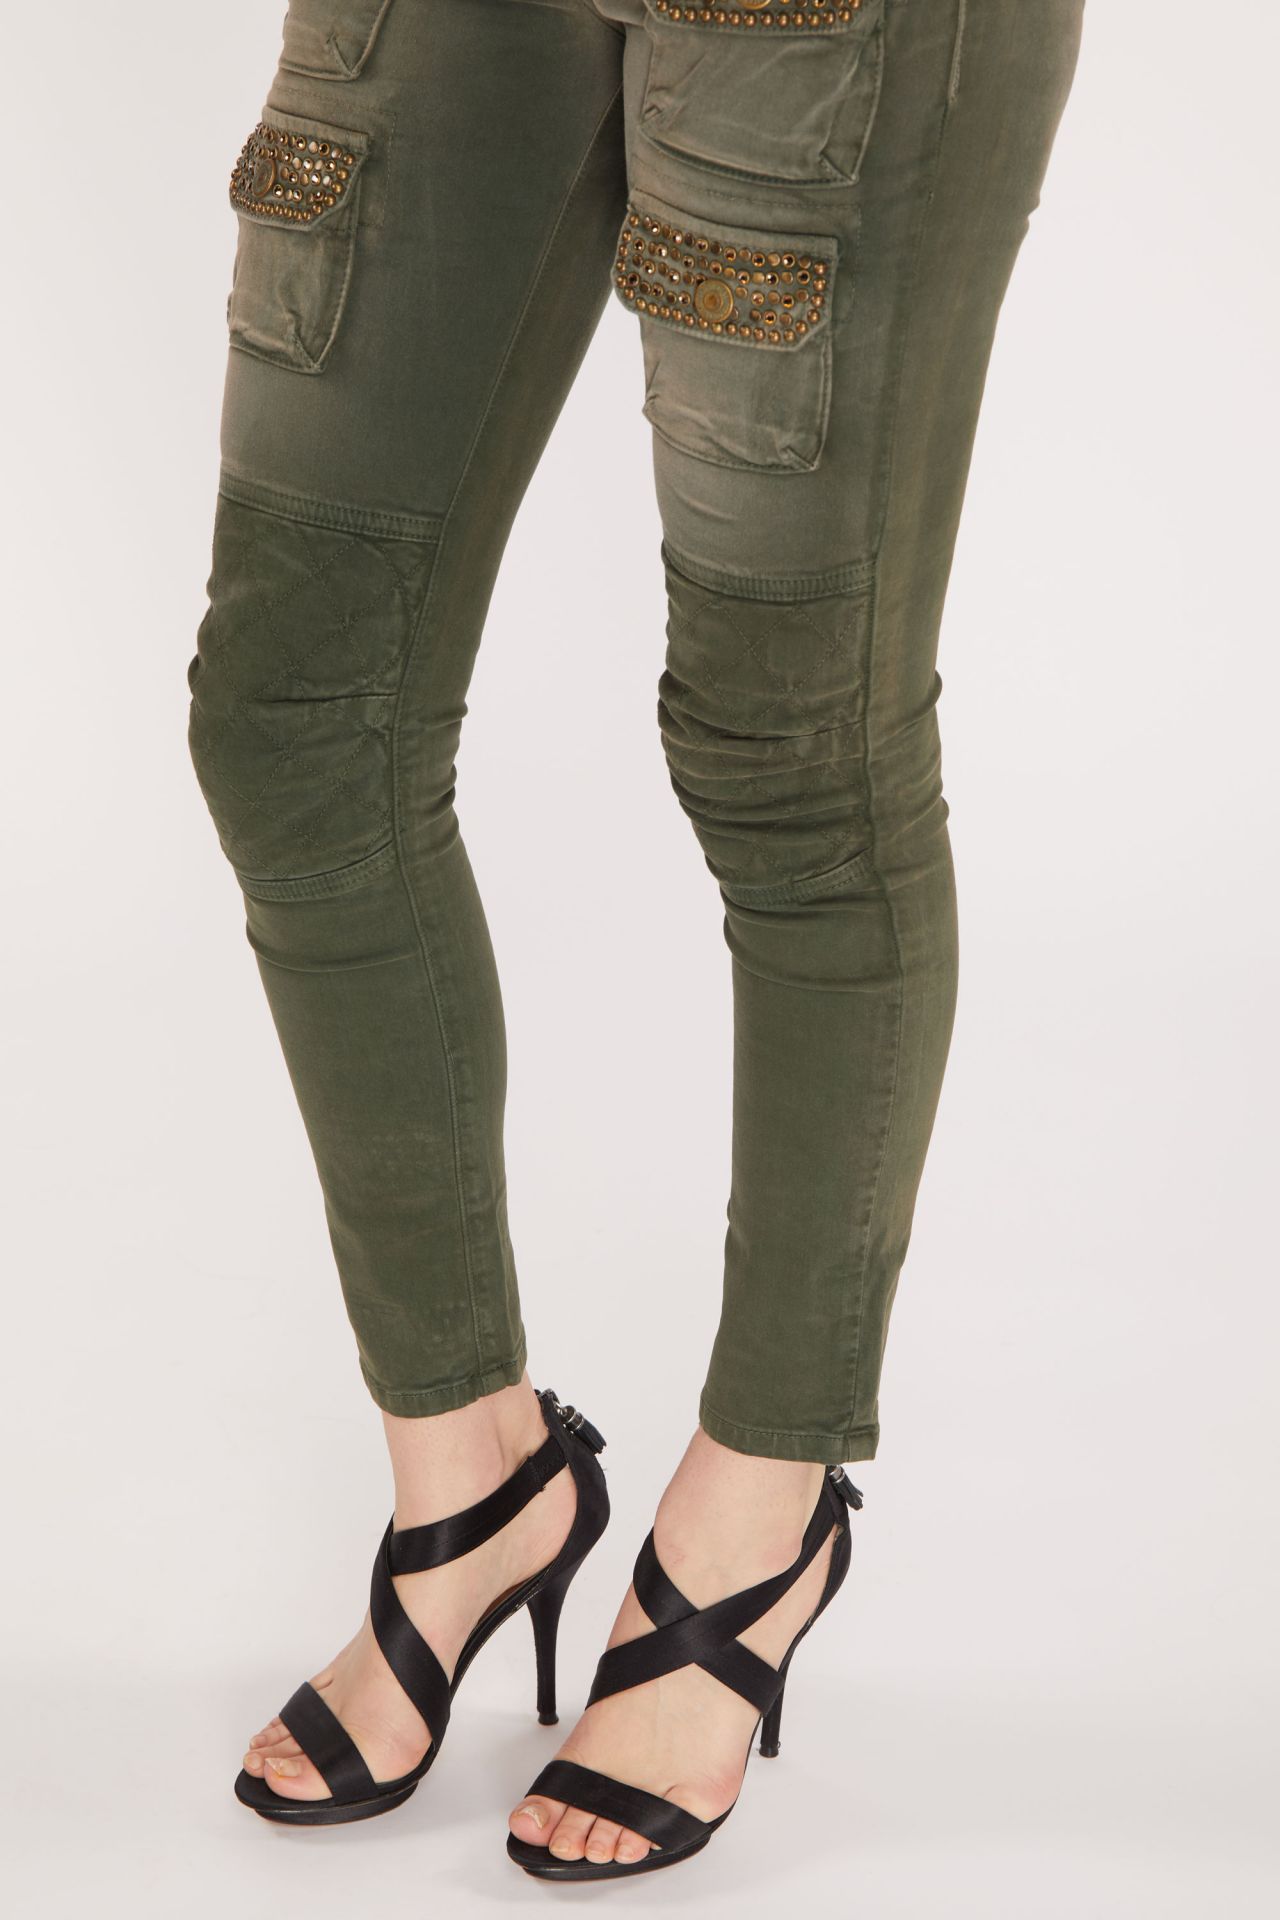 MILITARY INSPIRED WOMEN'S SKINNY UTILITARIAN JEANS IN SULFUR ARMY GREEN WITH STUDS AND CRYSTALS